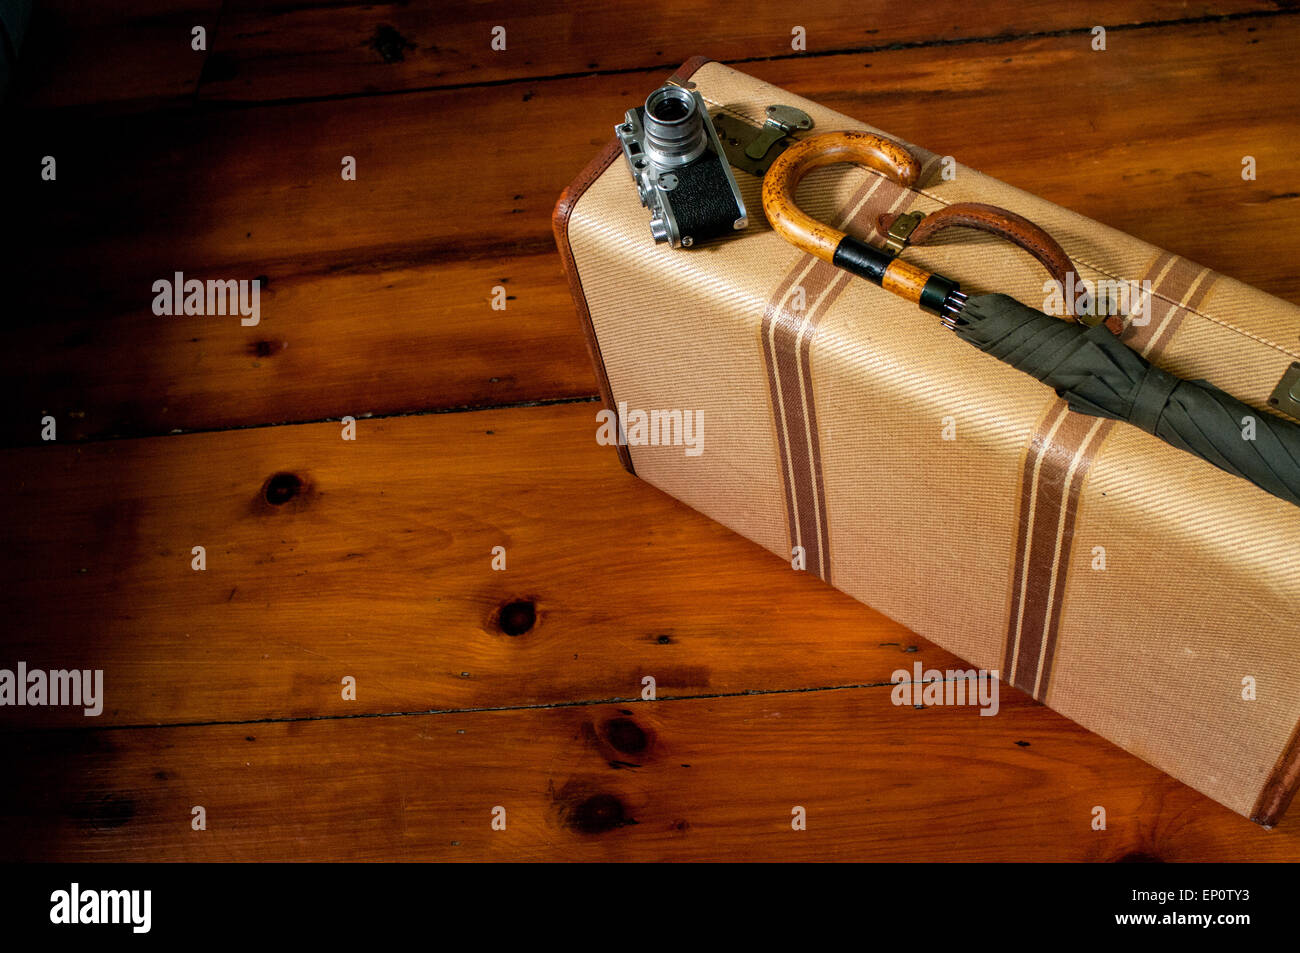 A vintage suitcase, camera, and umbrella on a wood floor. Stock Photo